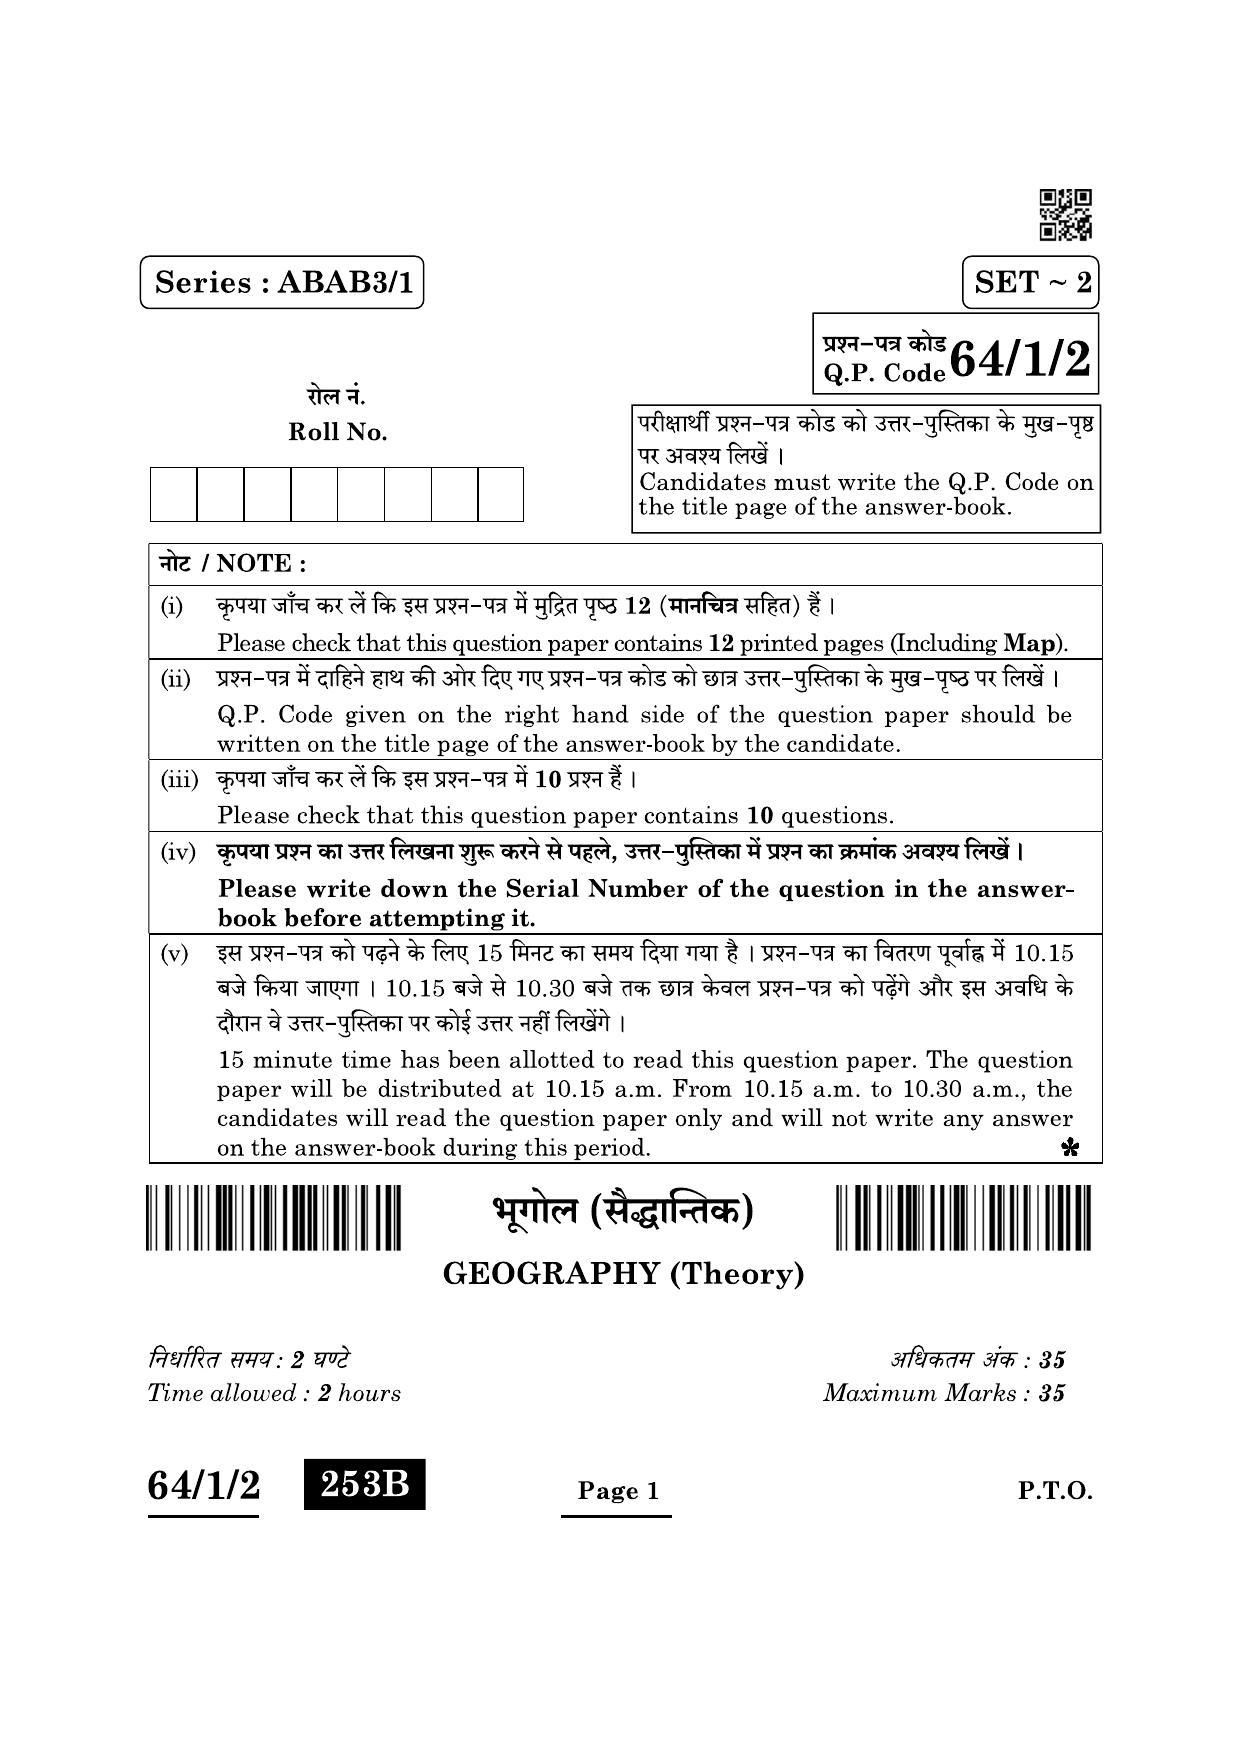 CBSE Class 12 64-1-2 Geography 2022 Question Paper - Page 1